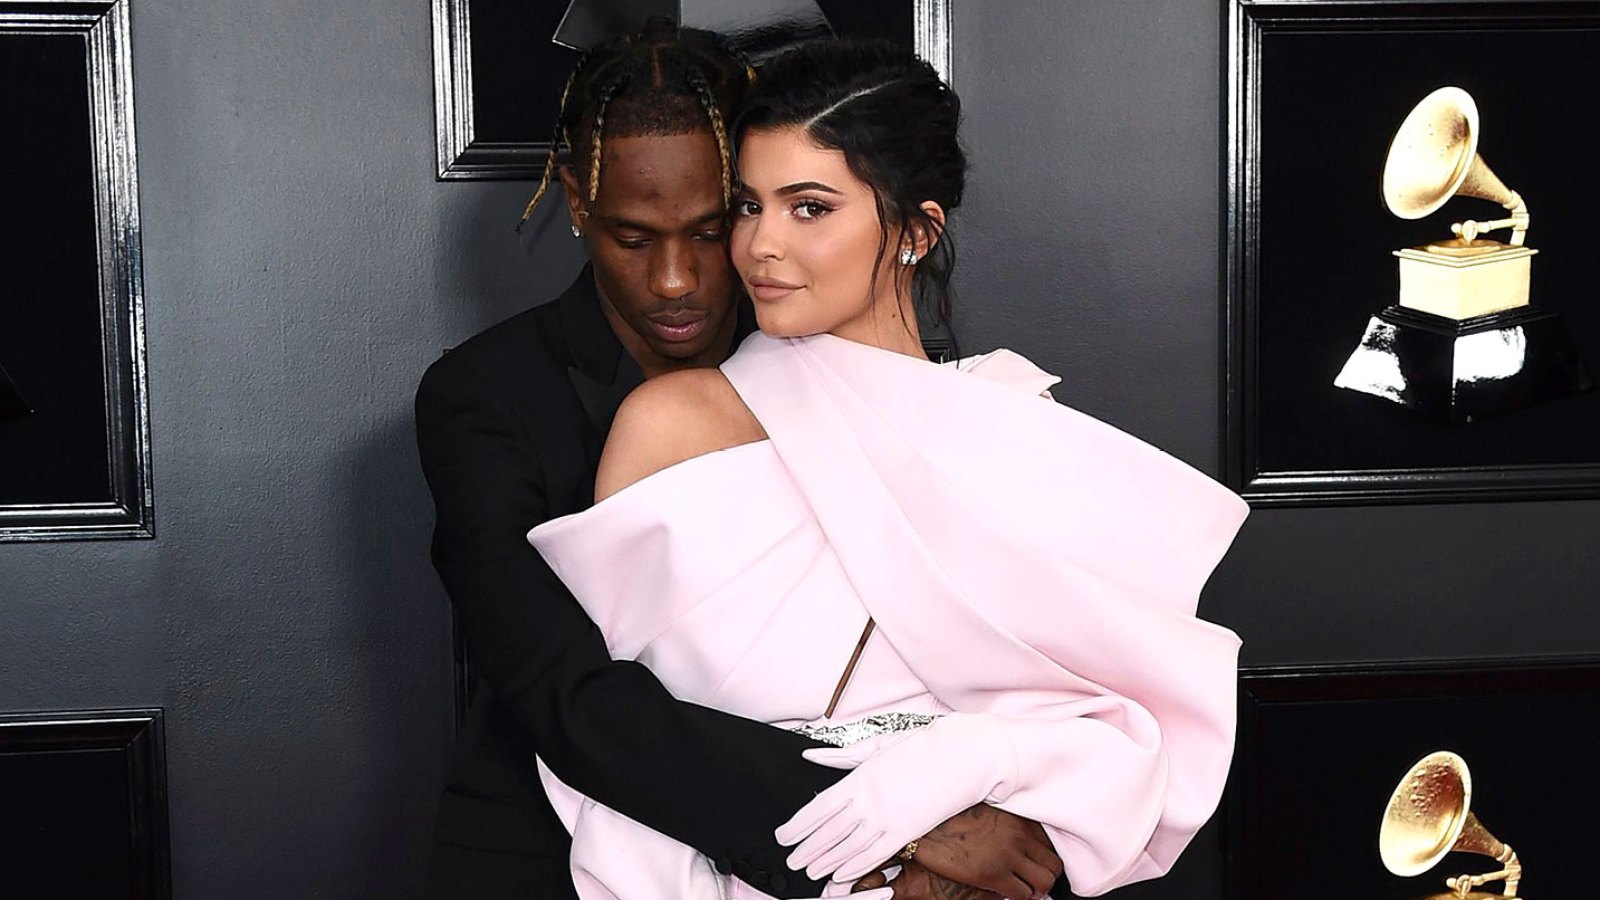 Kylie Jenner and Travis Scott Working on Getting Back Together